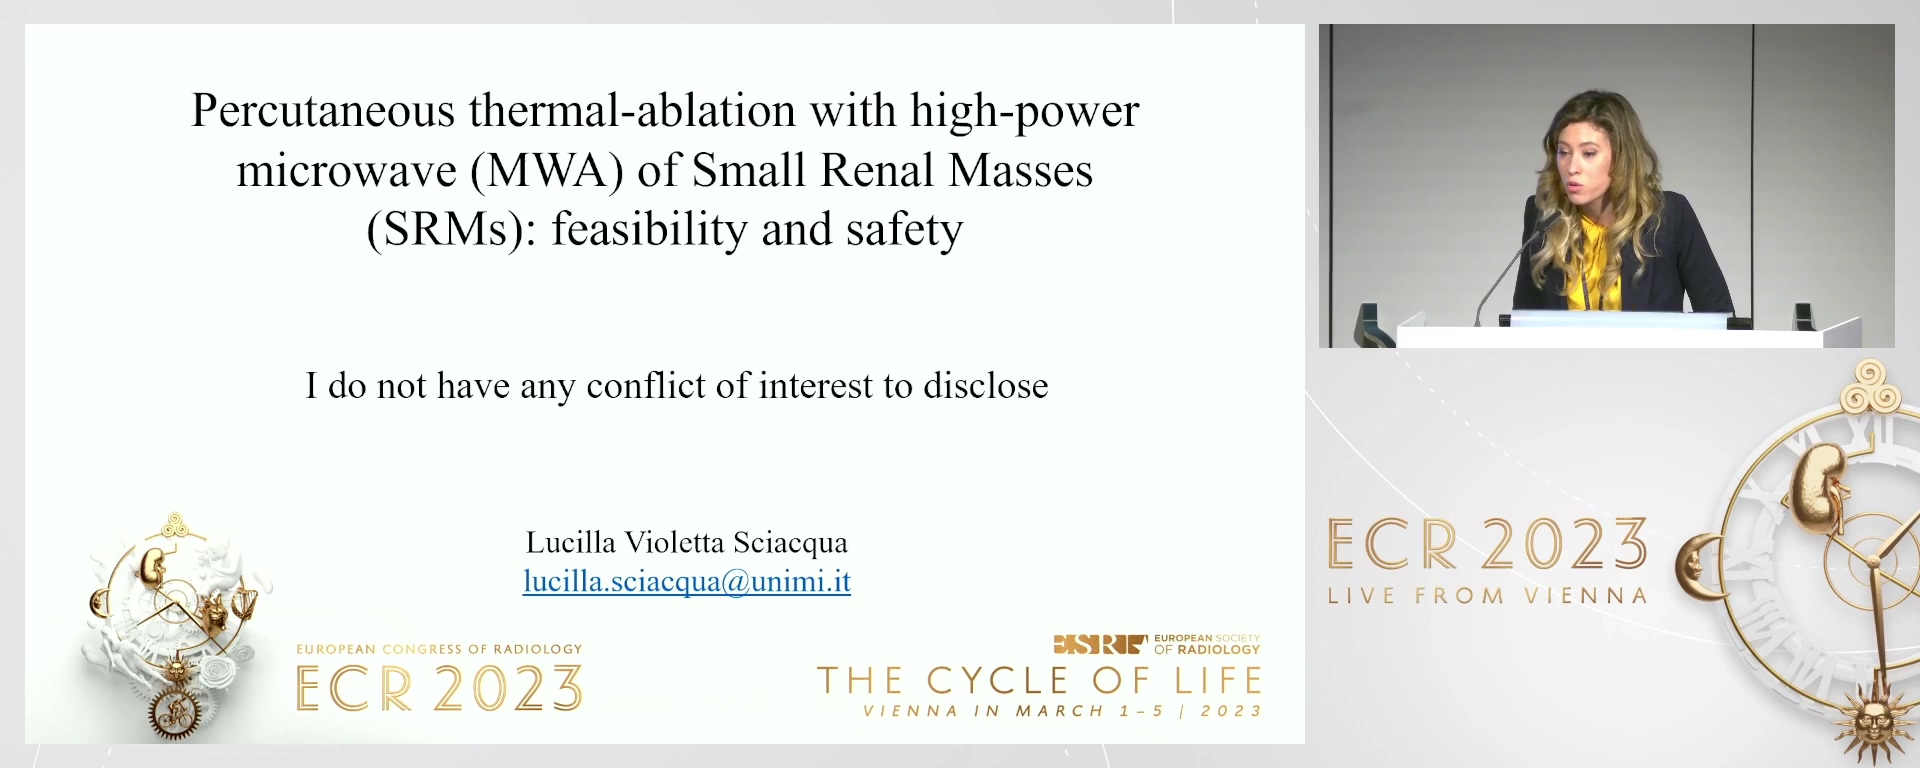 Percutaneous thermal ablation with high-power microwave (MWA) of small renal masses (SRMs): feasibility and safety